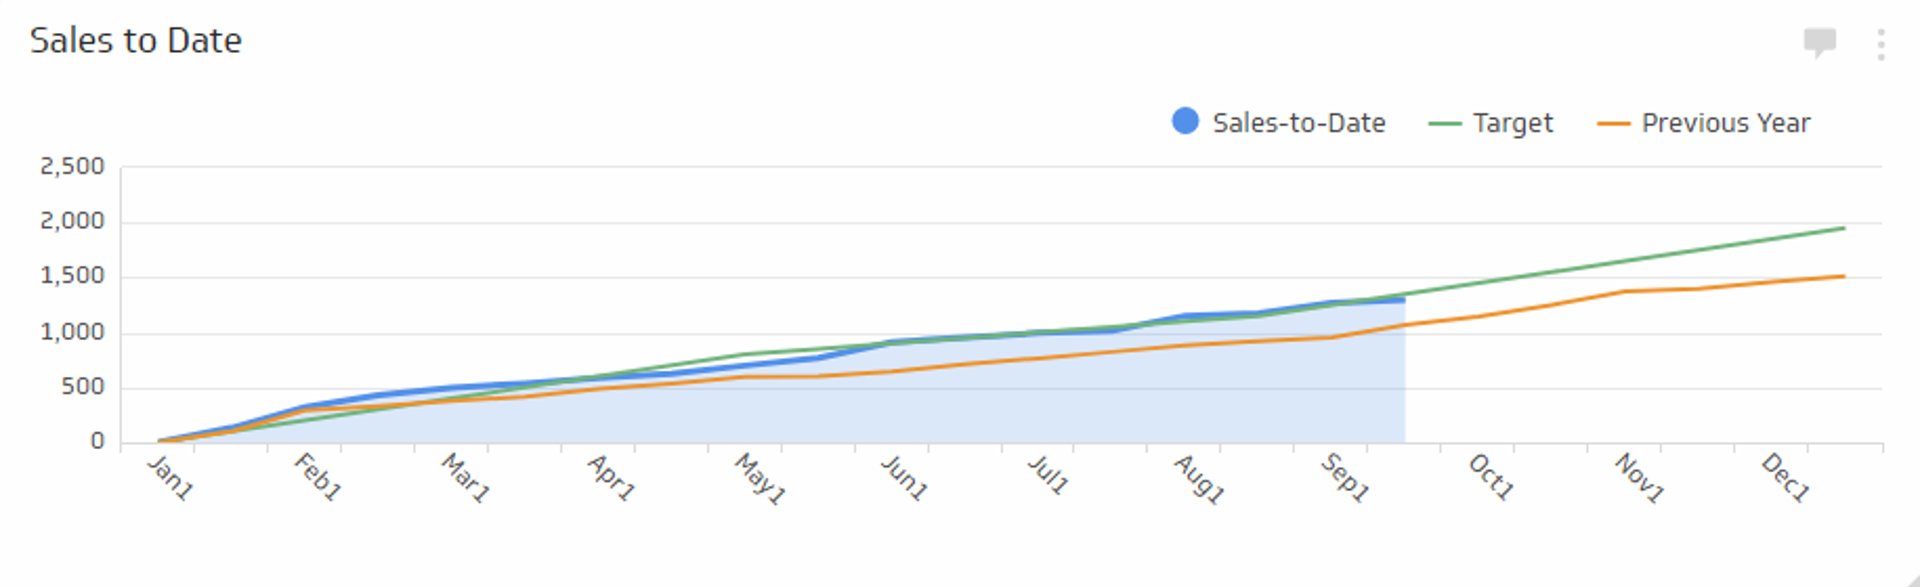 Sales to Date